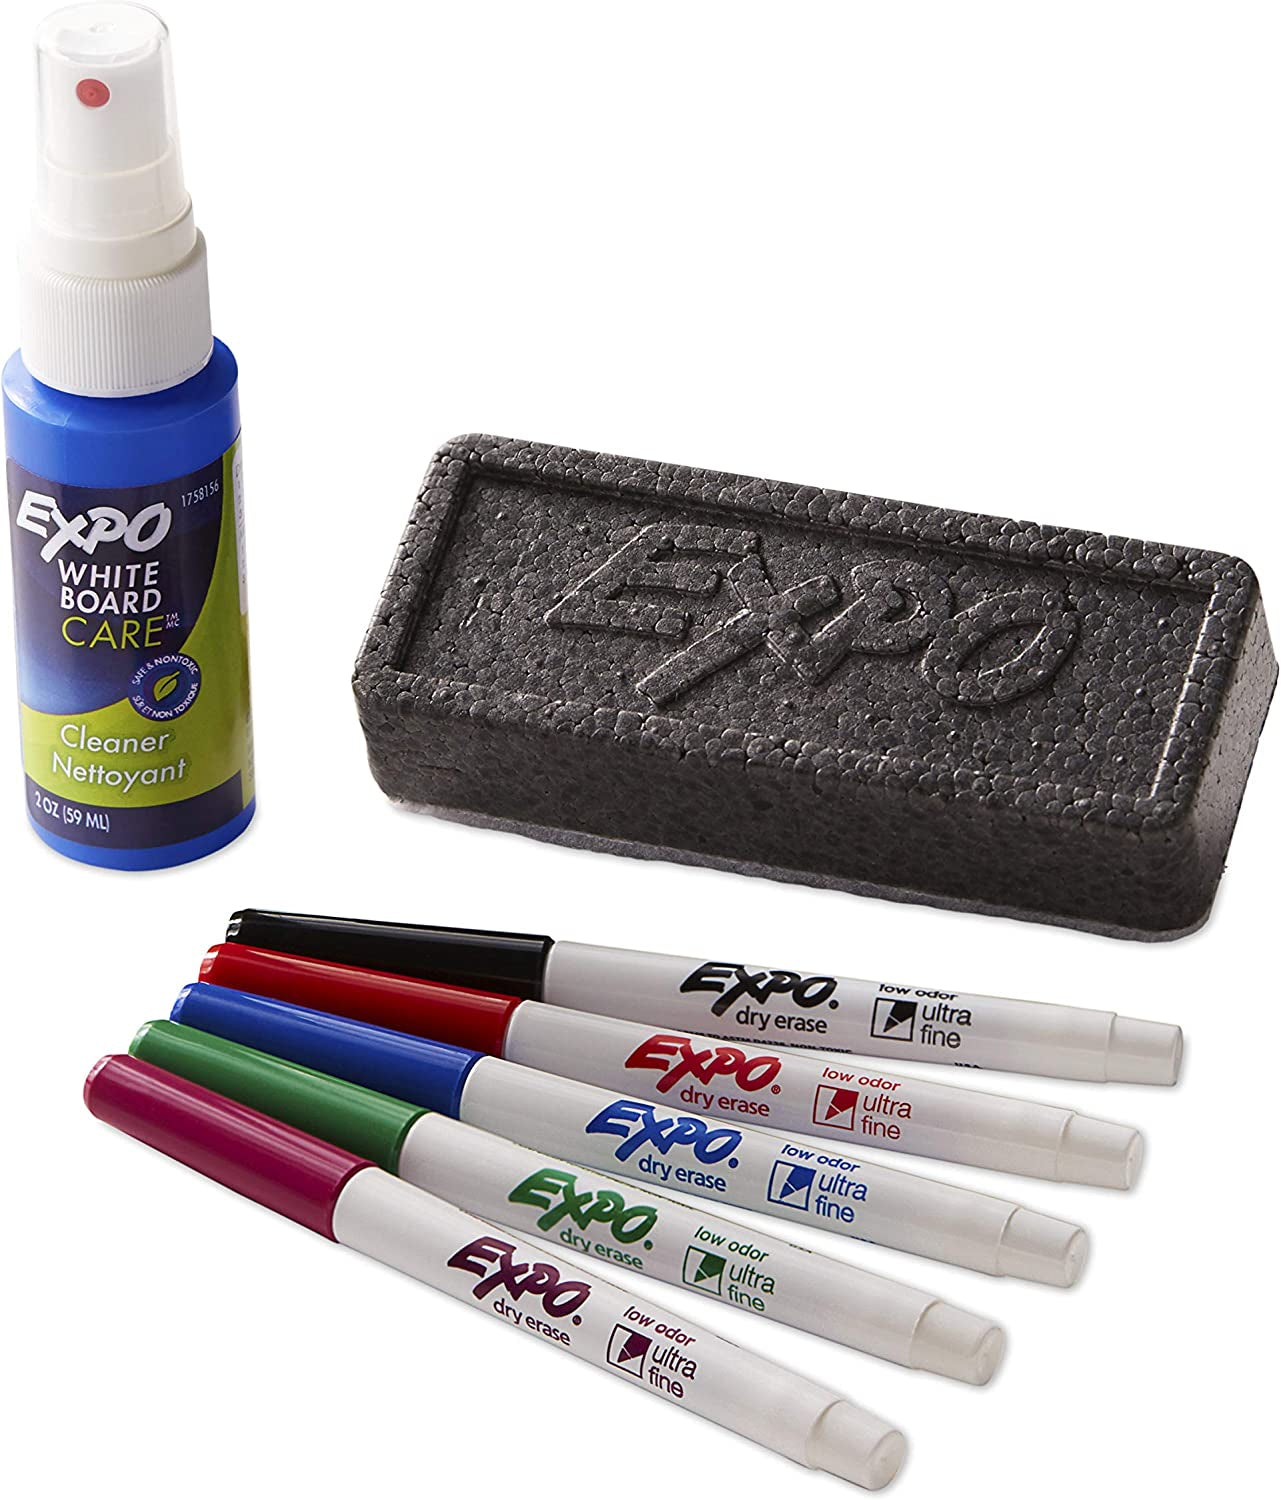 Low Odor Dry Erase Marker Set with White Board Eraser and Cleaner, Chisel Tip Dry Erase Markers, Assorted Colors, 6 Piece Set with Whiteboard Cleaner